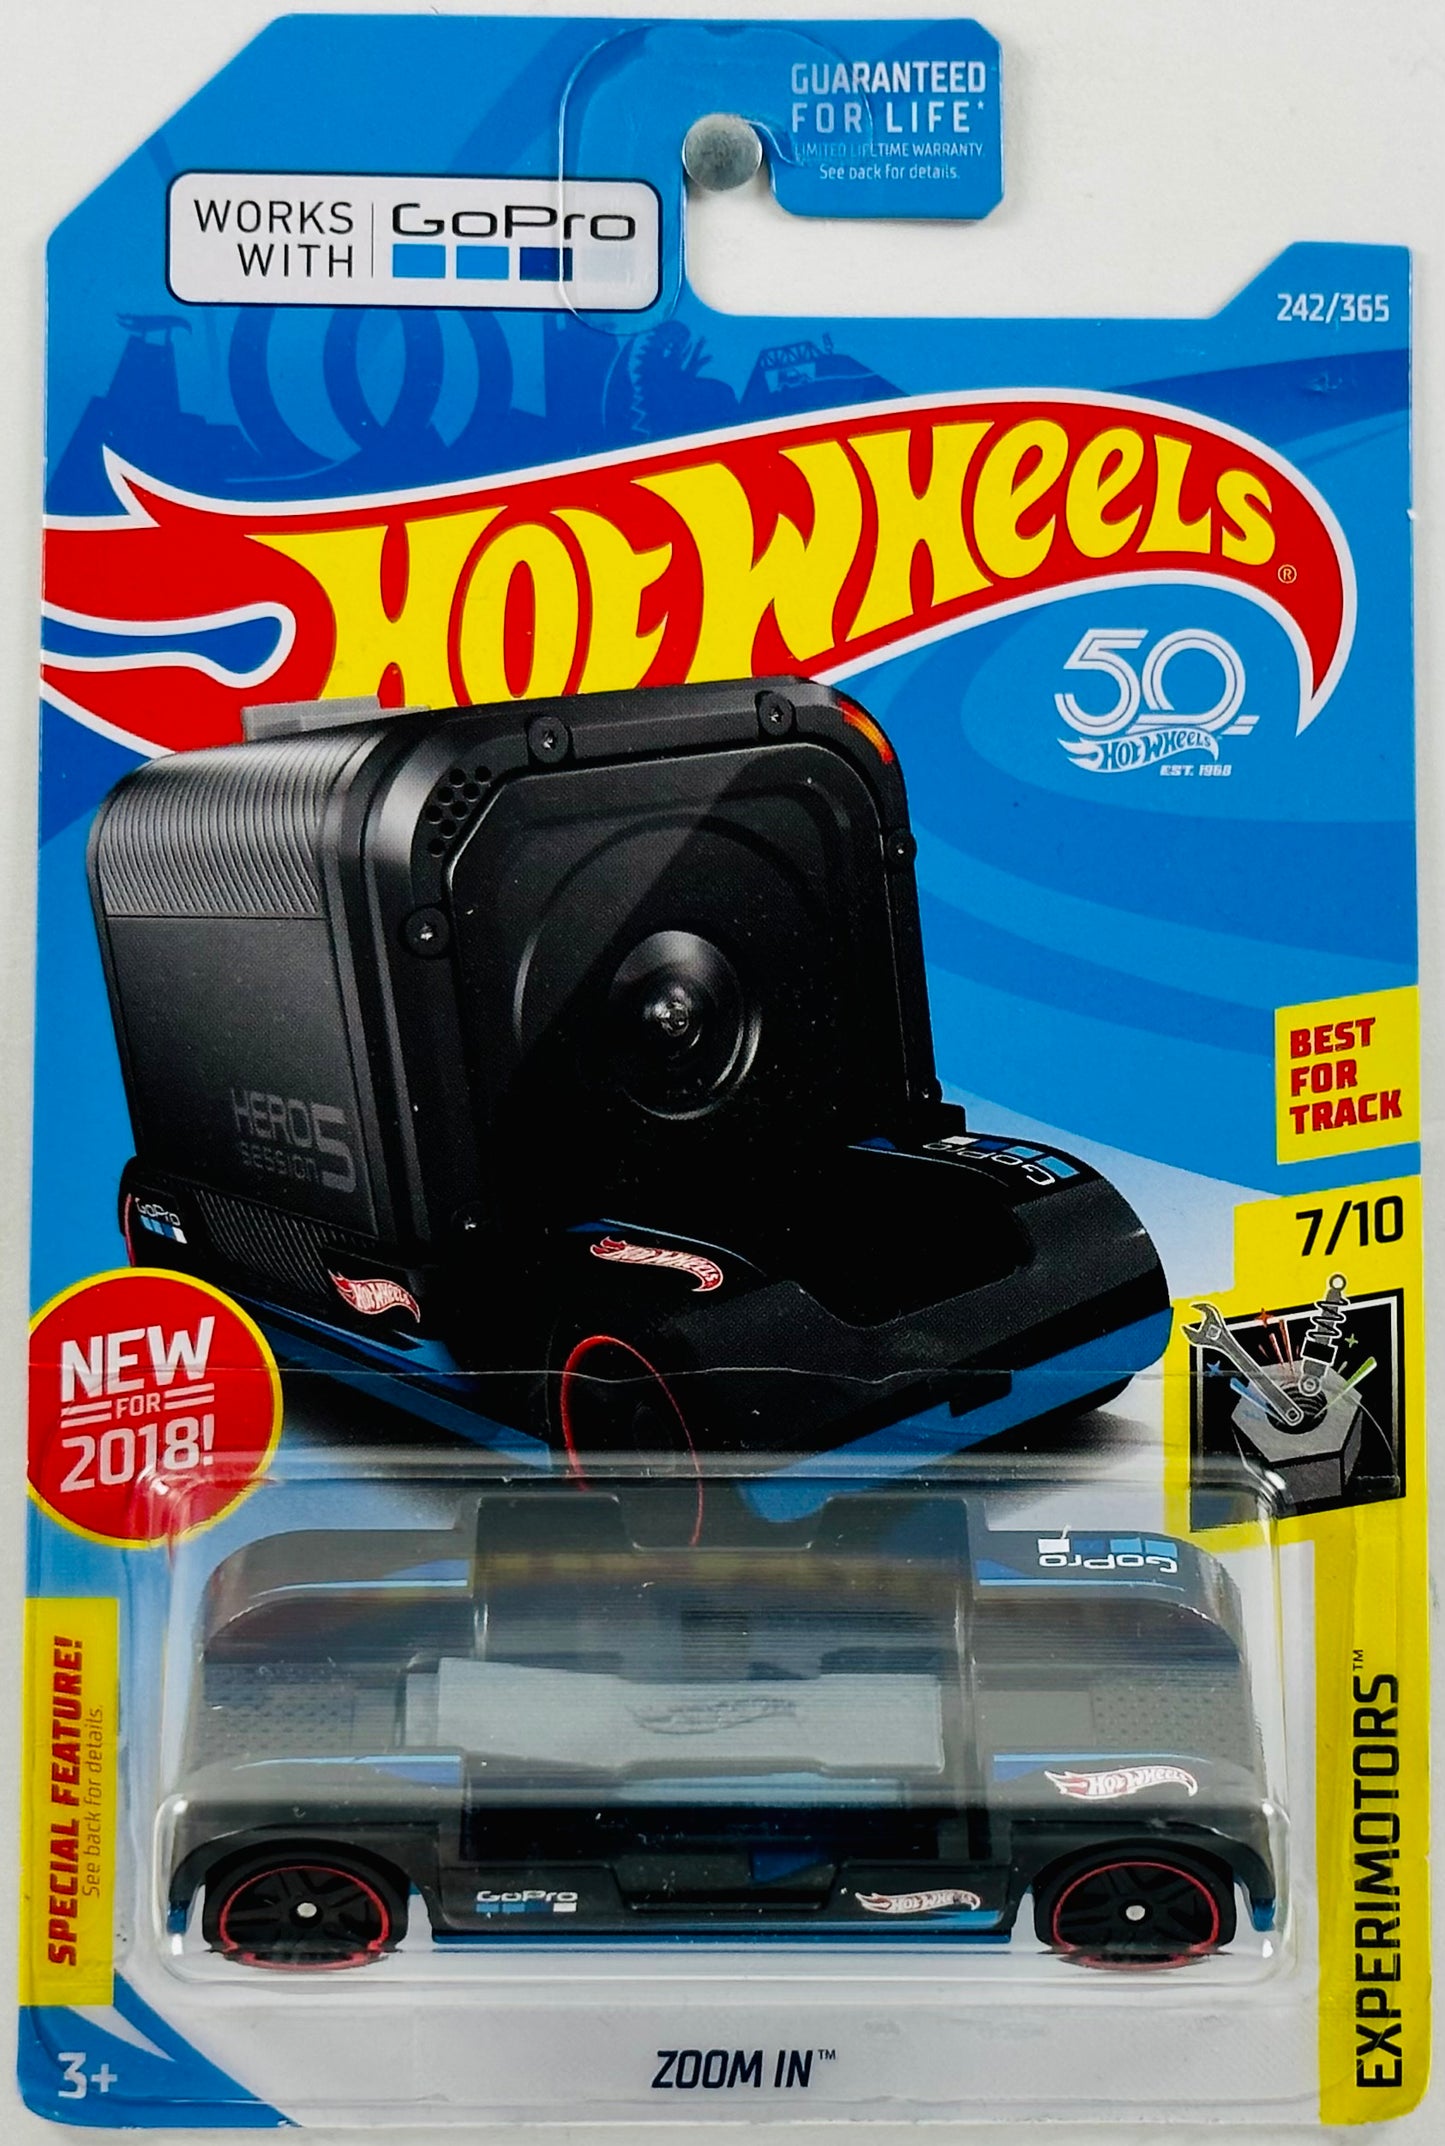 Hot Wheels 2018 - Collector # 242/365 - Experimotors 07/10 - New Models - Zoom In - Black - Works With Go Pro - USA 50th Card